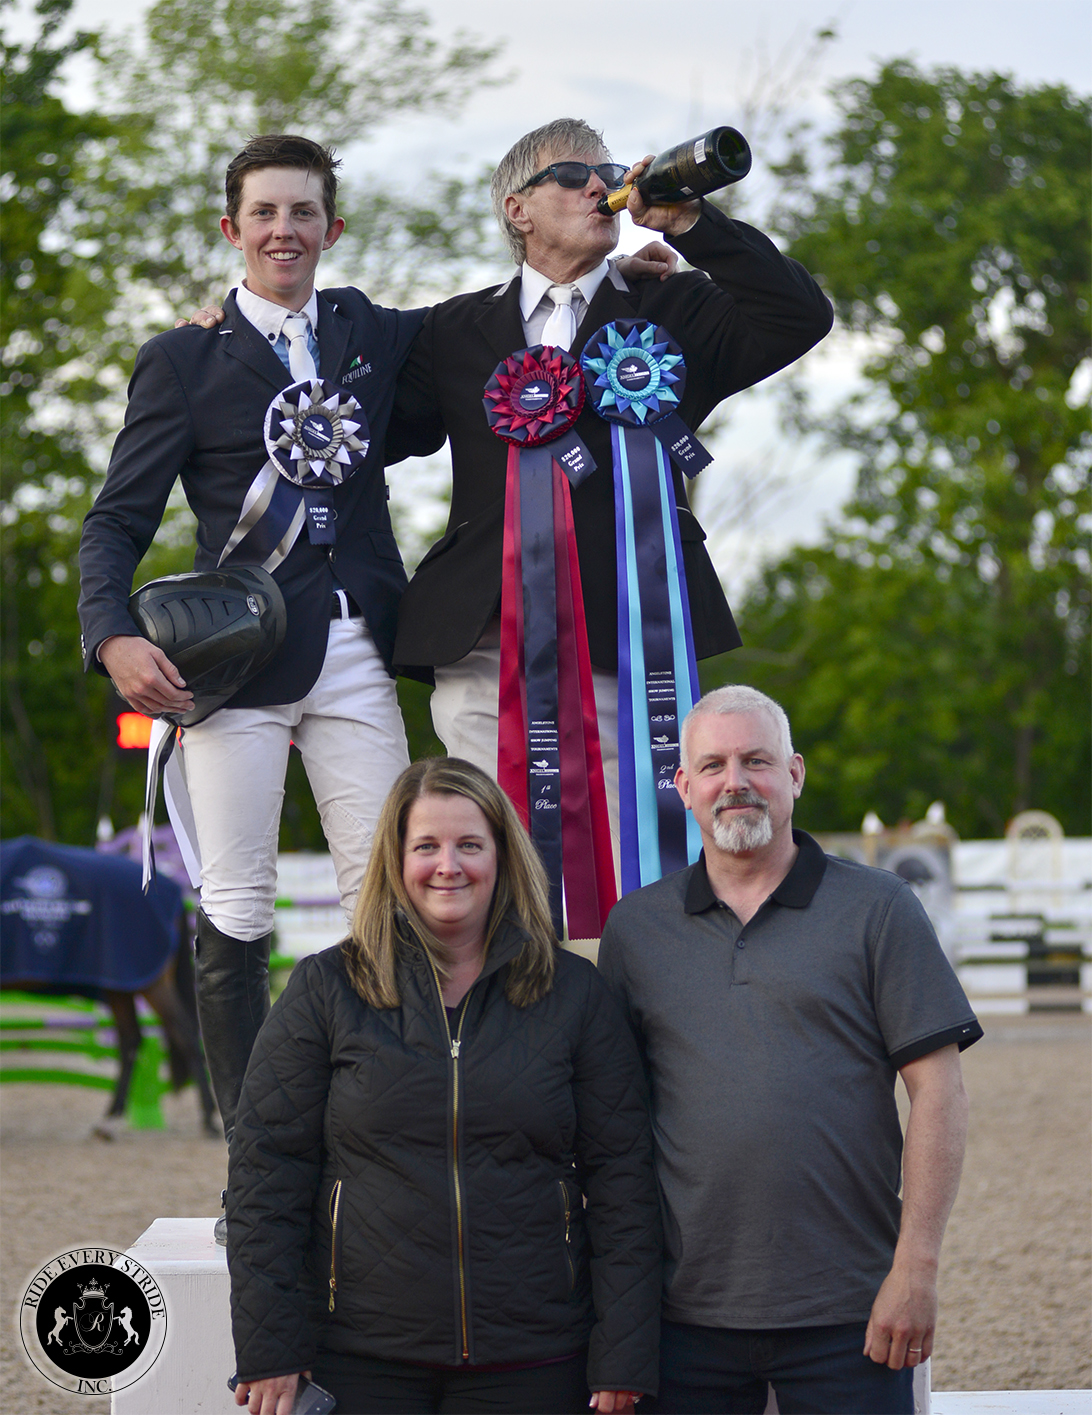 The Erin Welcome - $20,000 Ride Every Stride Grand Prix - 1st & 2nd: Hugh Graham and 3rd: Sam Walker